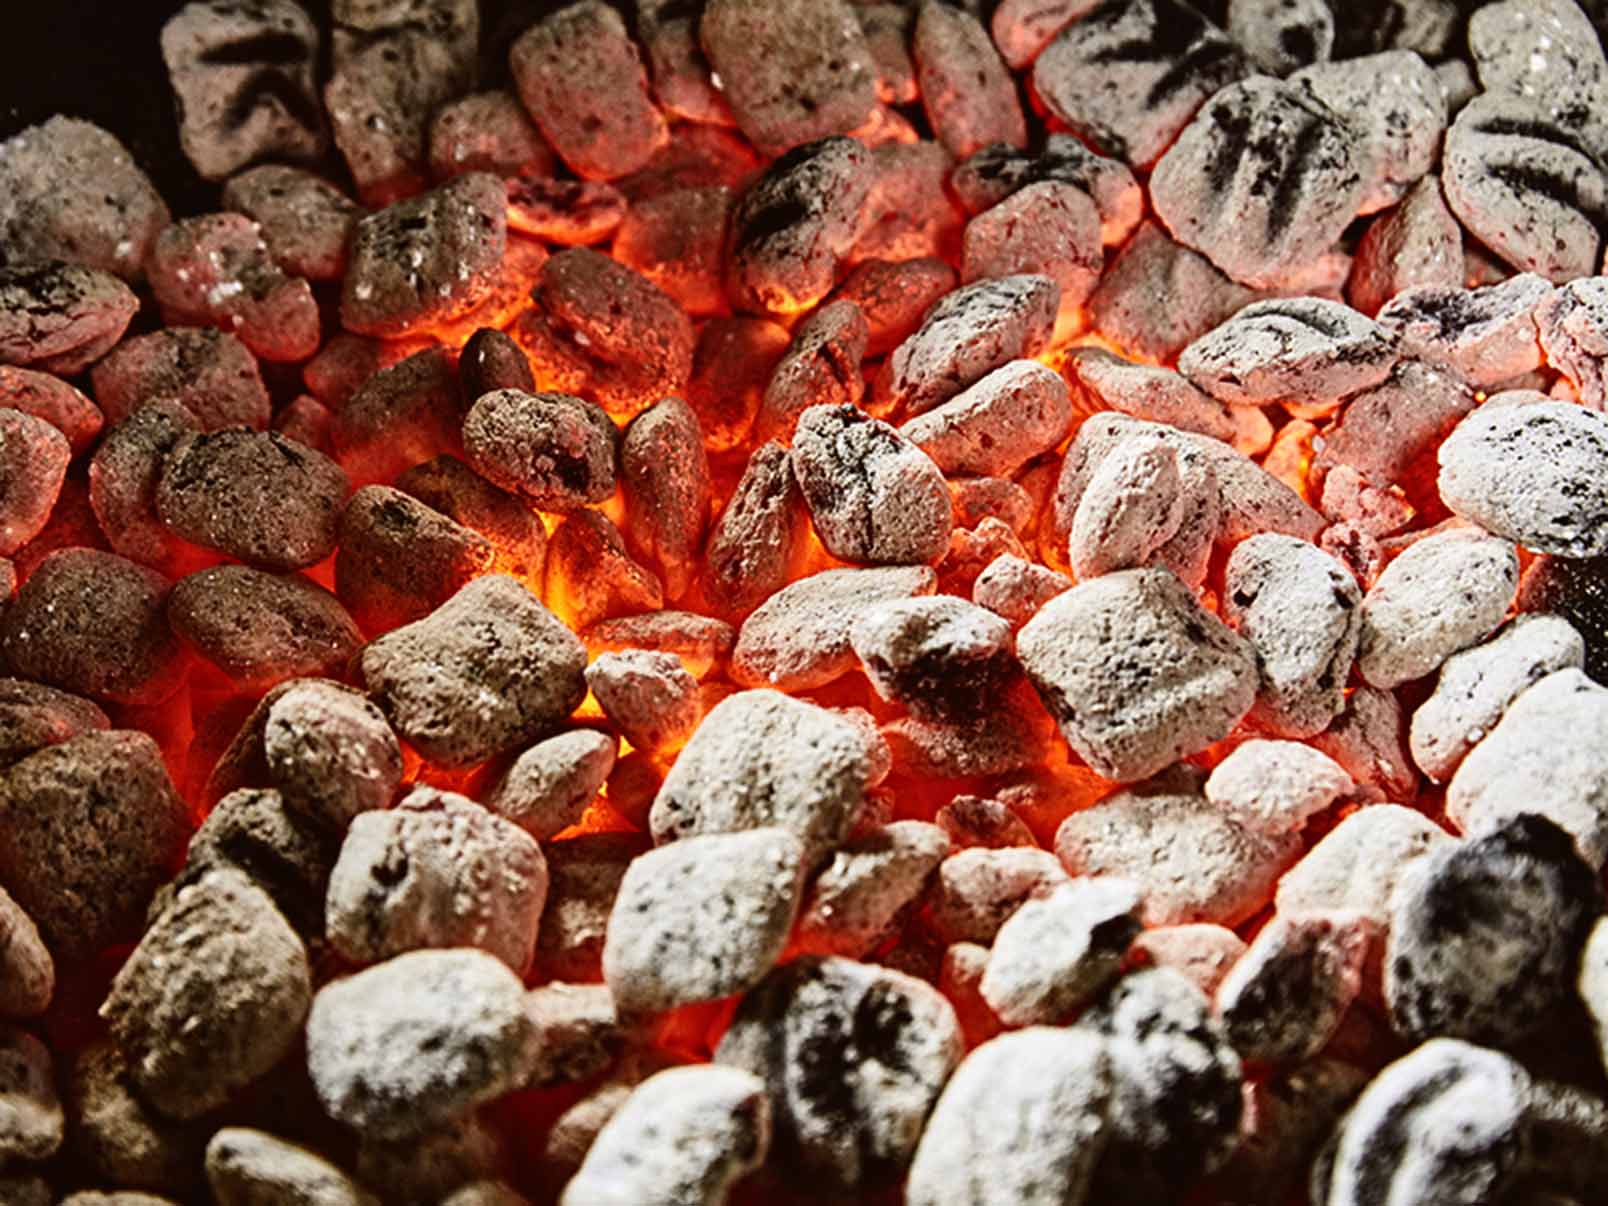 How to Arrange Charcoal Before Grilling